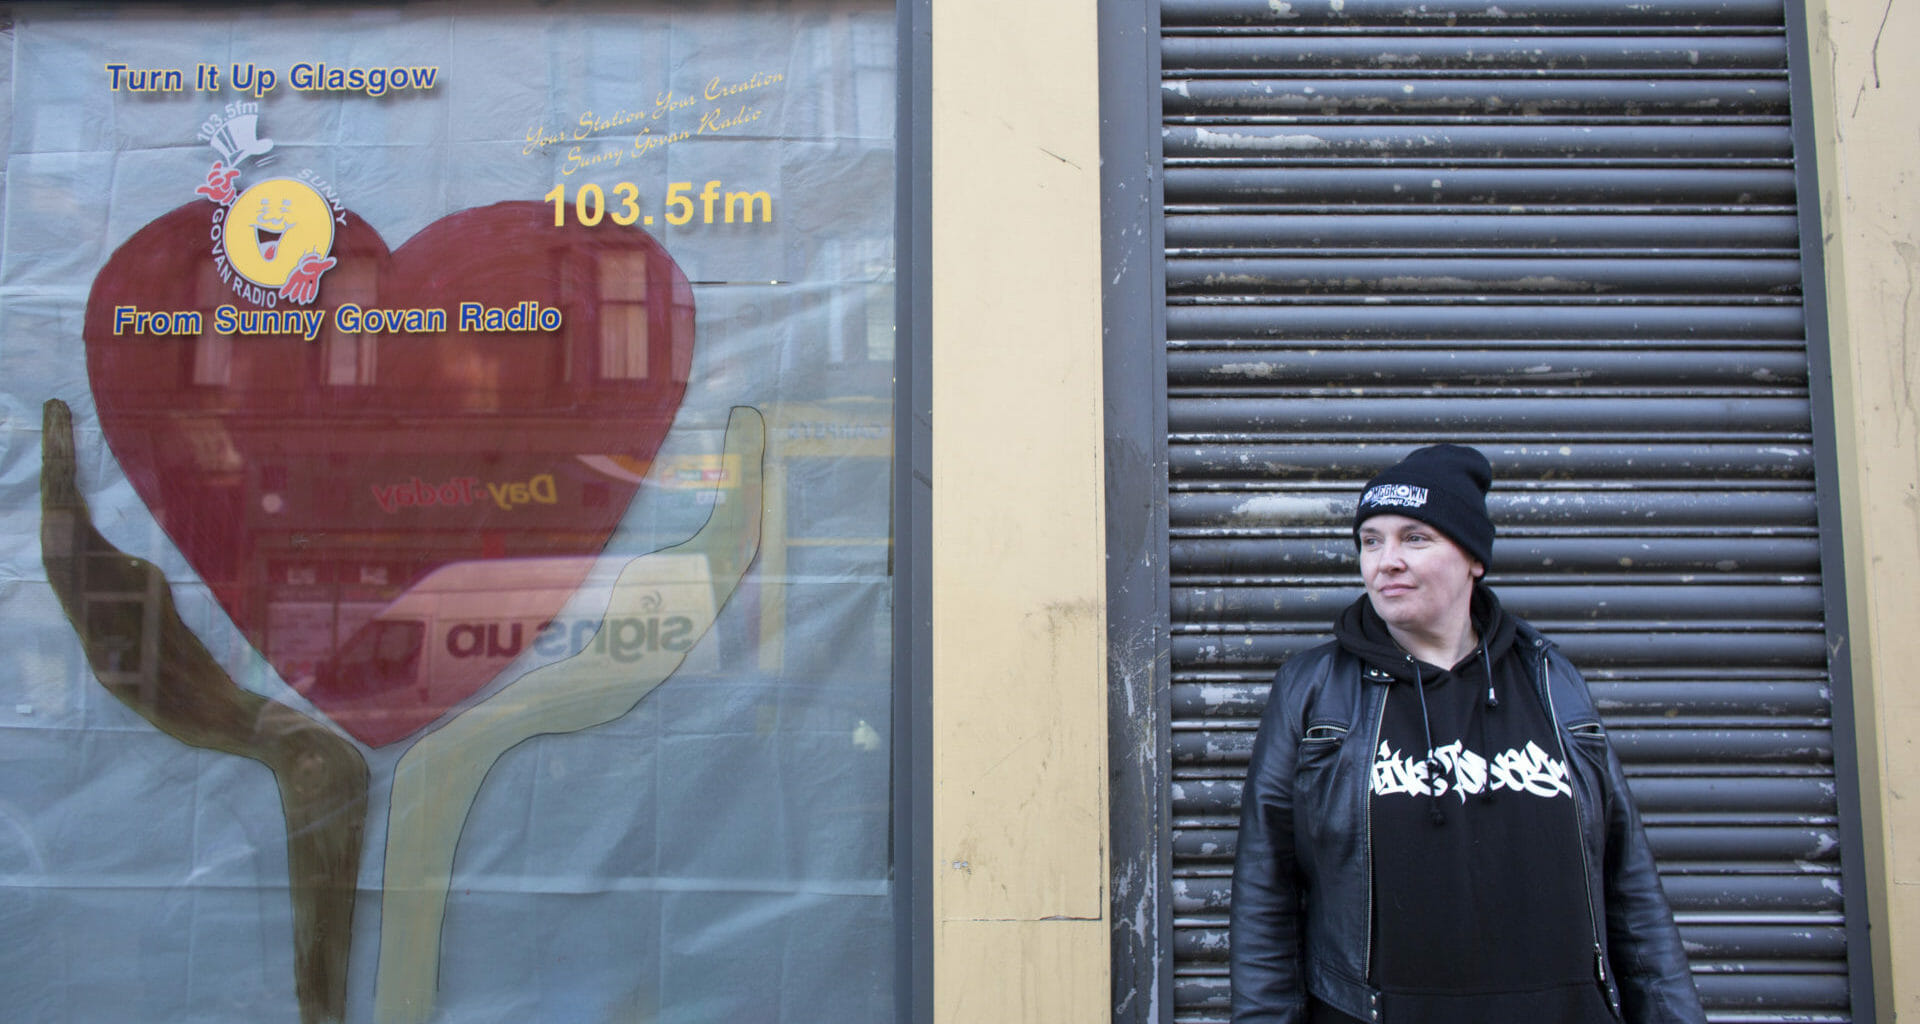 Sun is shining: the community radio station fighting for survival 3